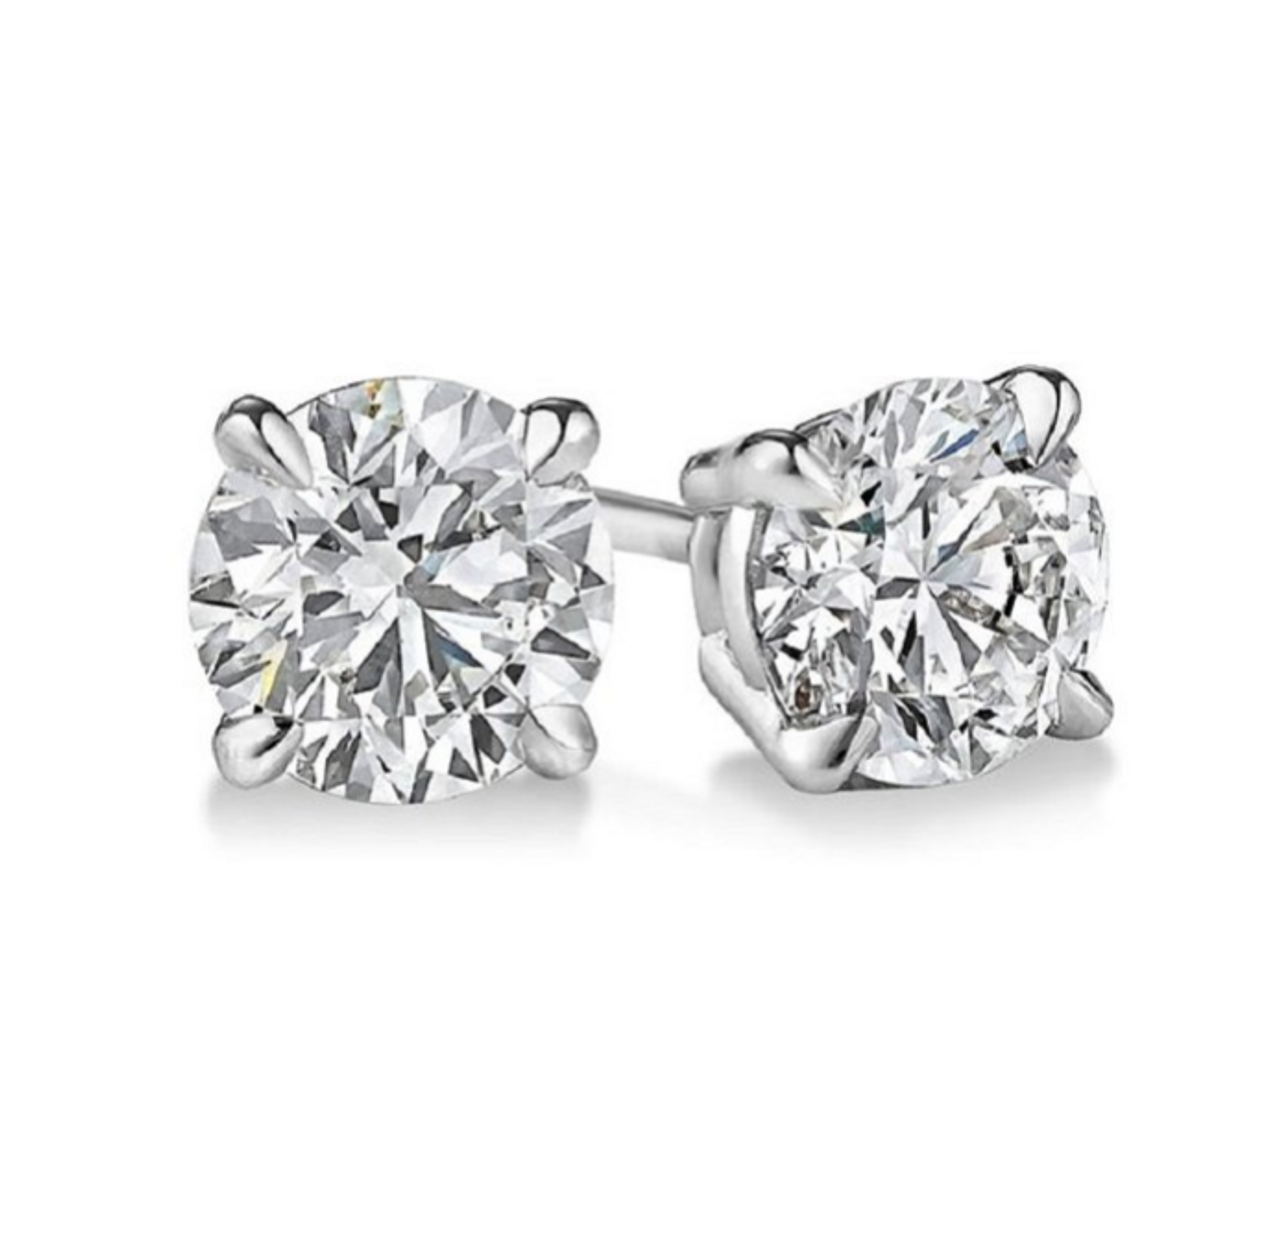 10K White Gold-Plated Sapphire Stud Earrings (Square- or Round-Cut) product image